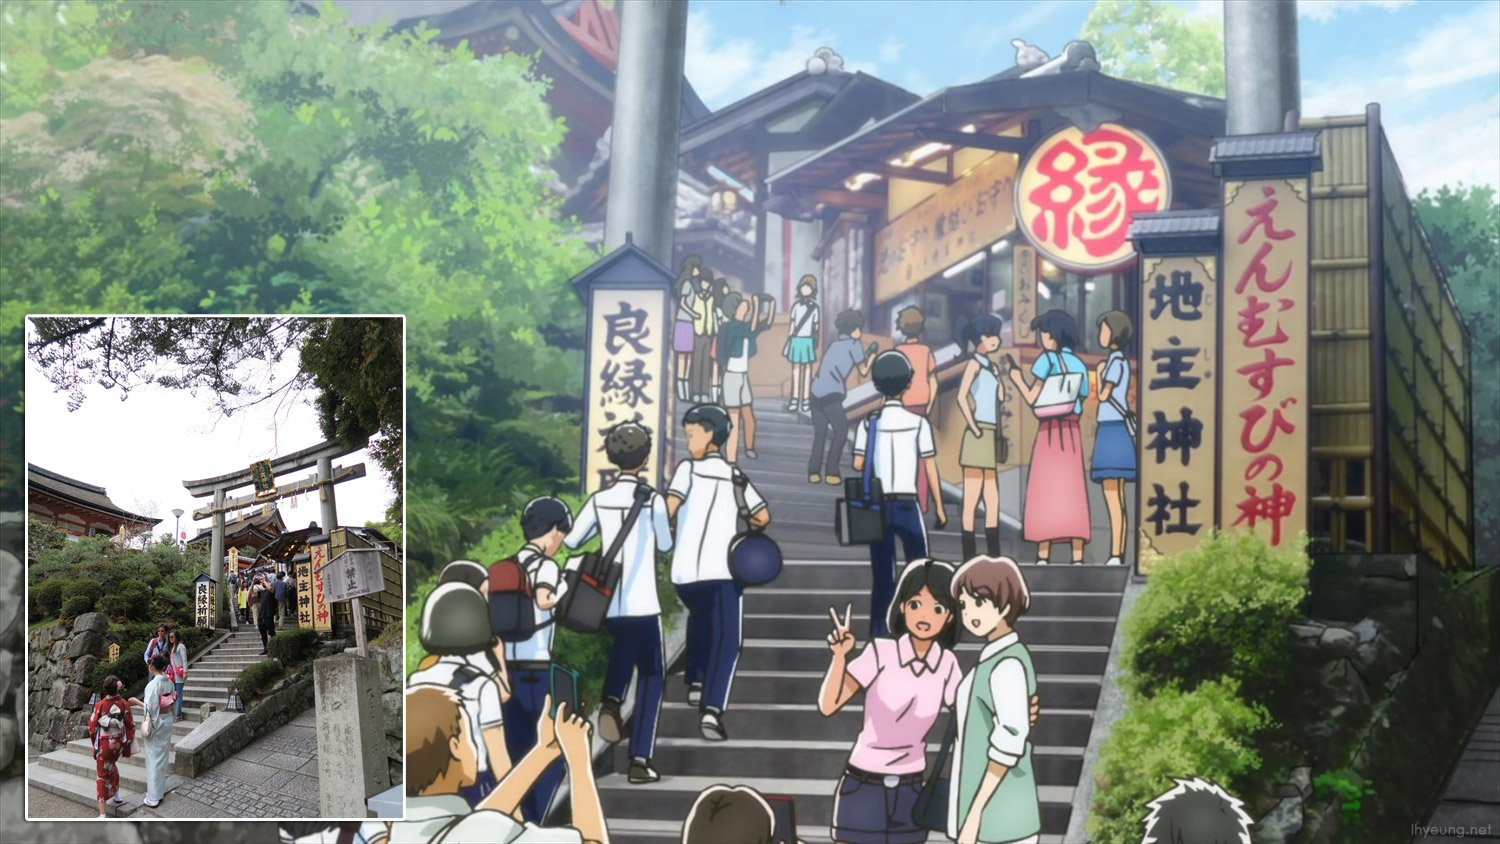 5 spots to visit in Shiga for anime and pop culture fans